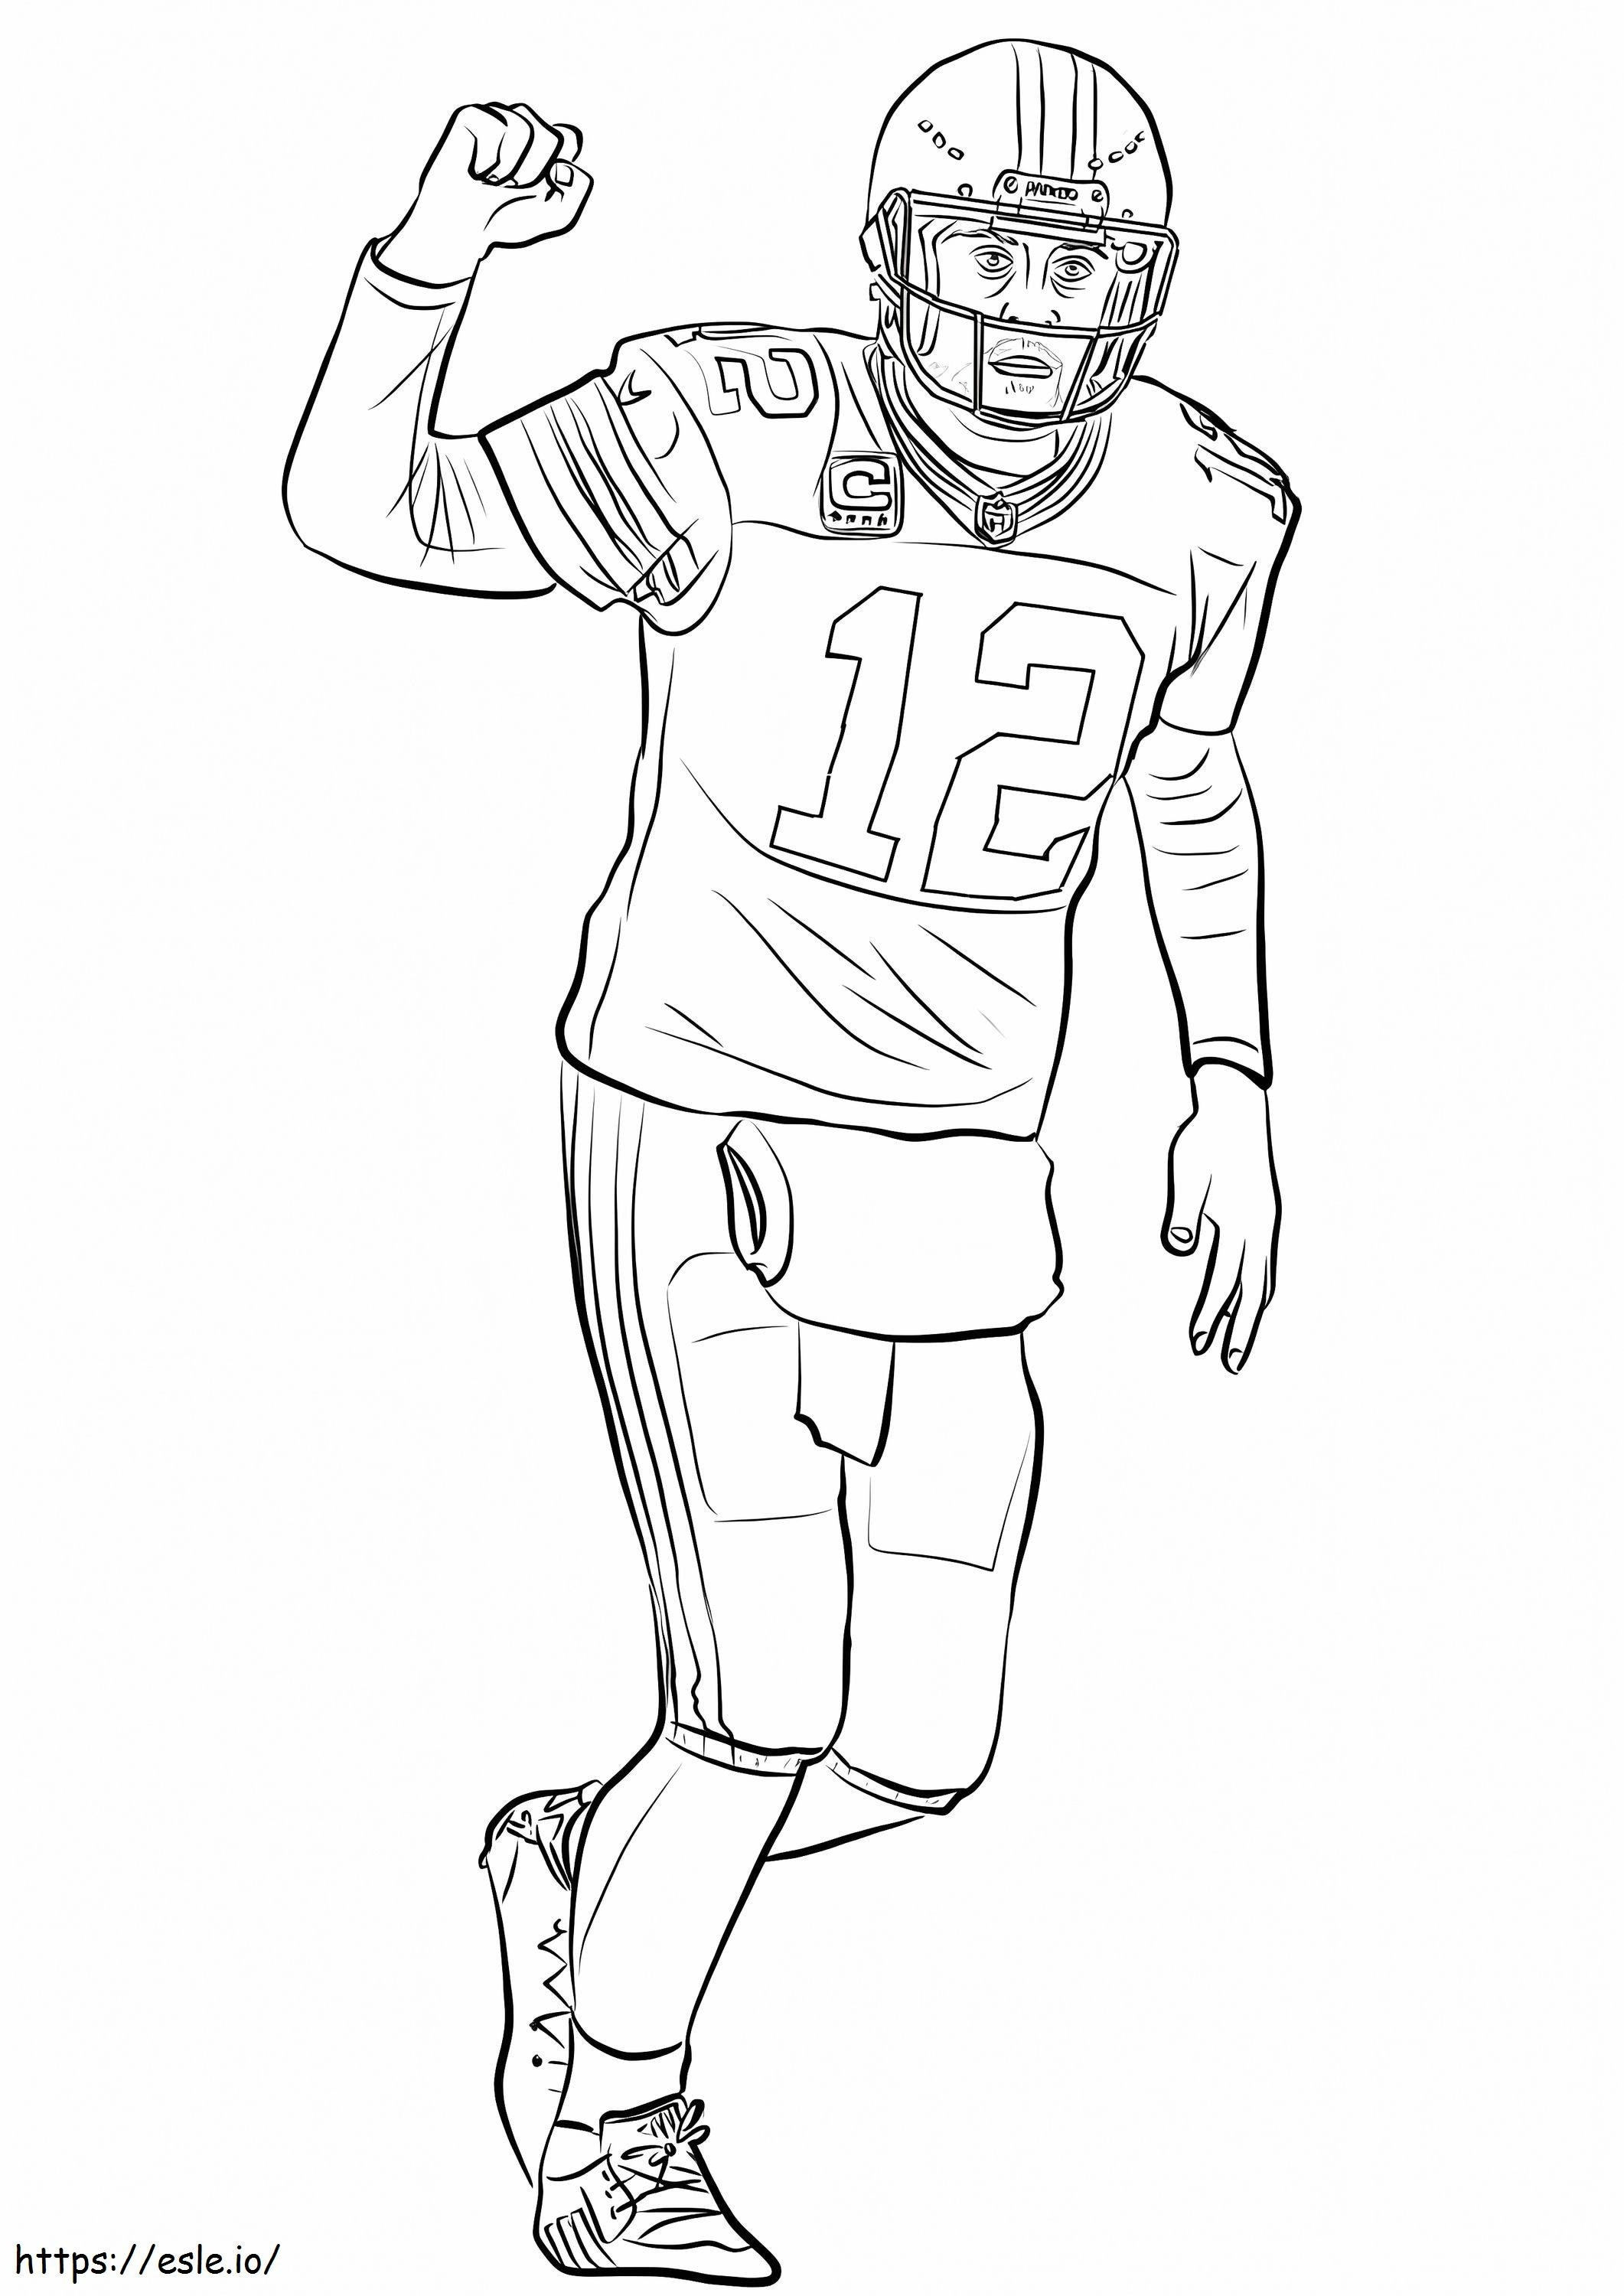 Aaron Rodgers Football Player coloring page